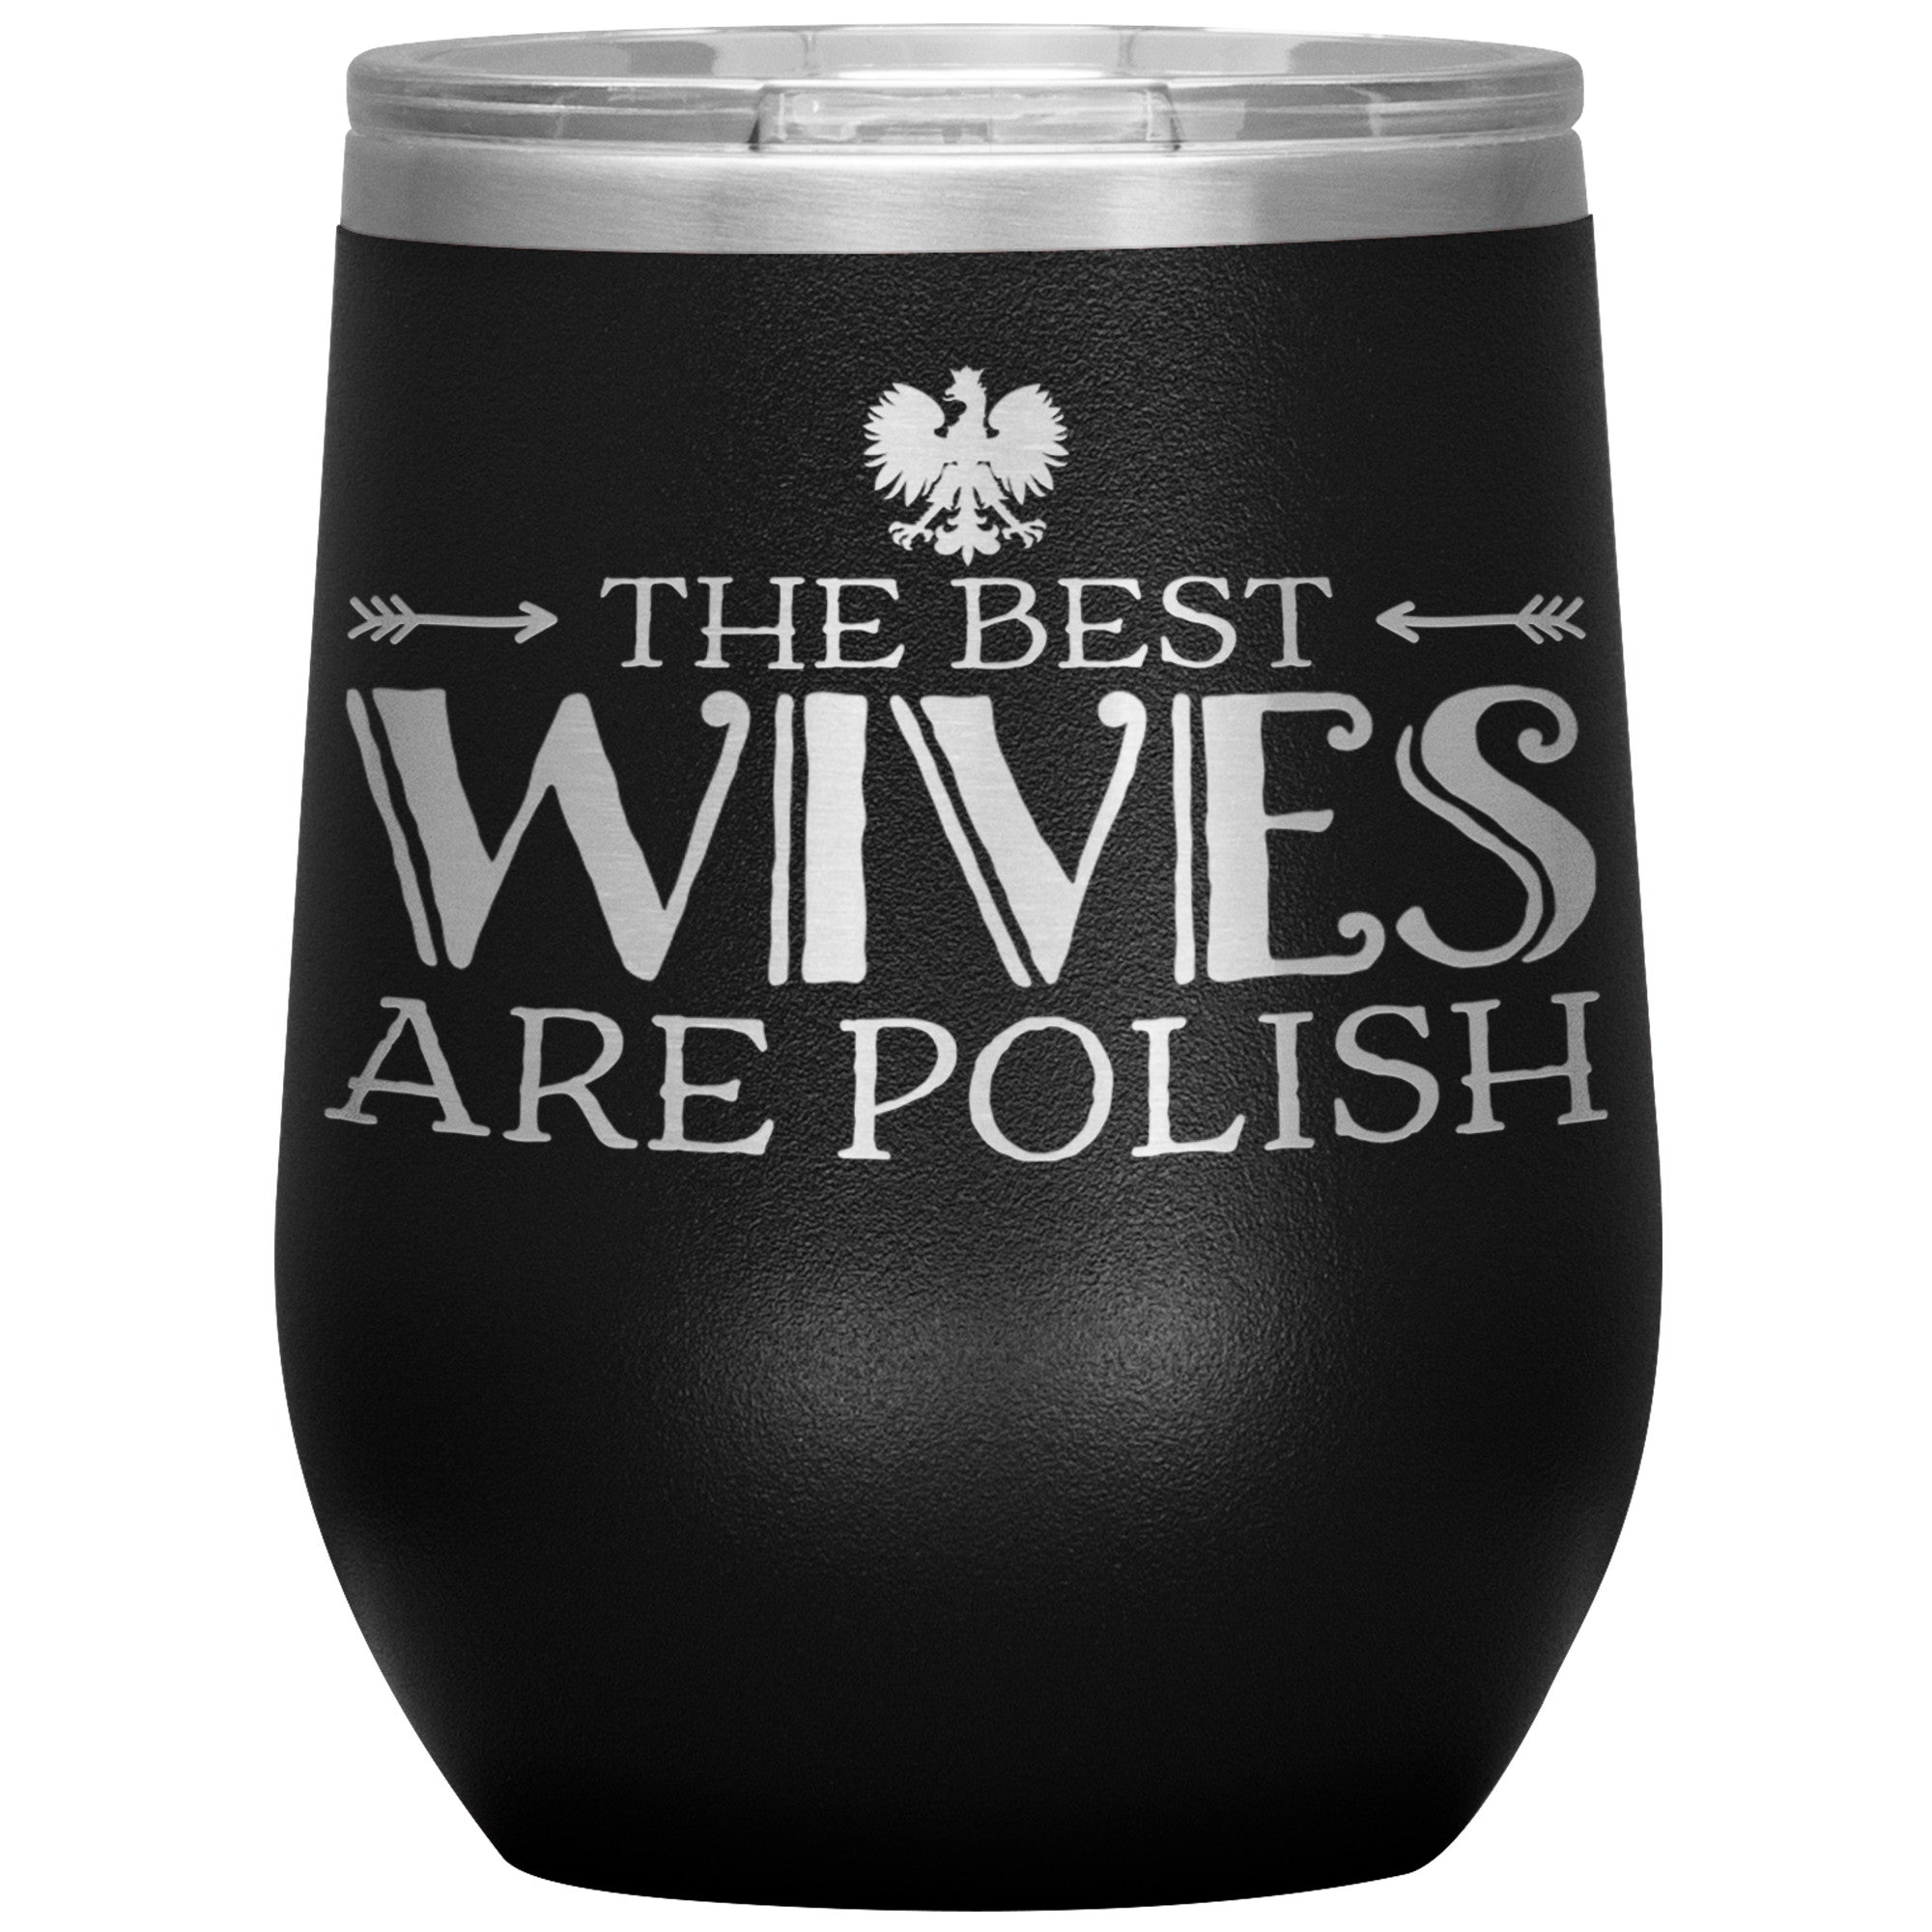 The Best Wives Are Polish Insulated Wine Tumbler Tumblers teelaunch Black  